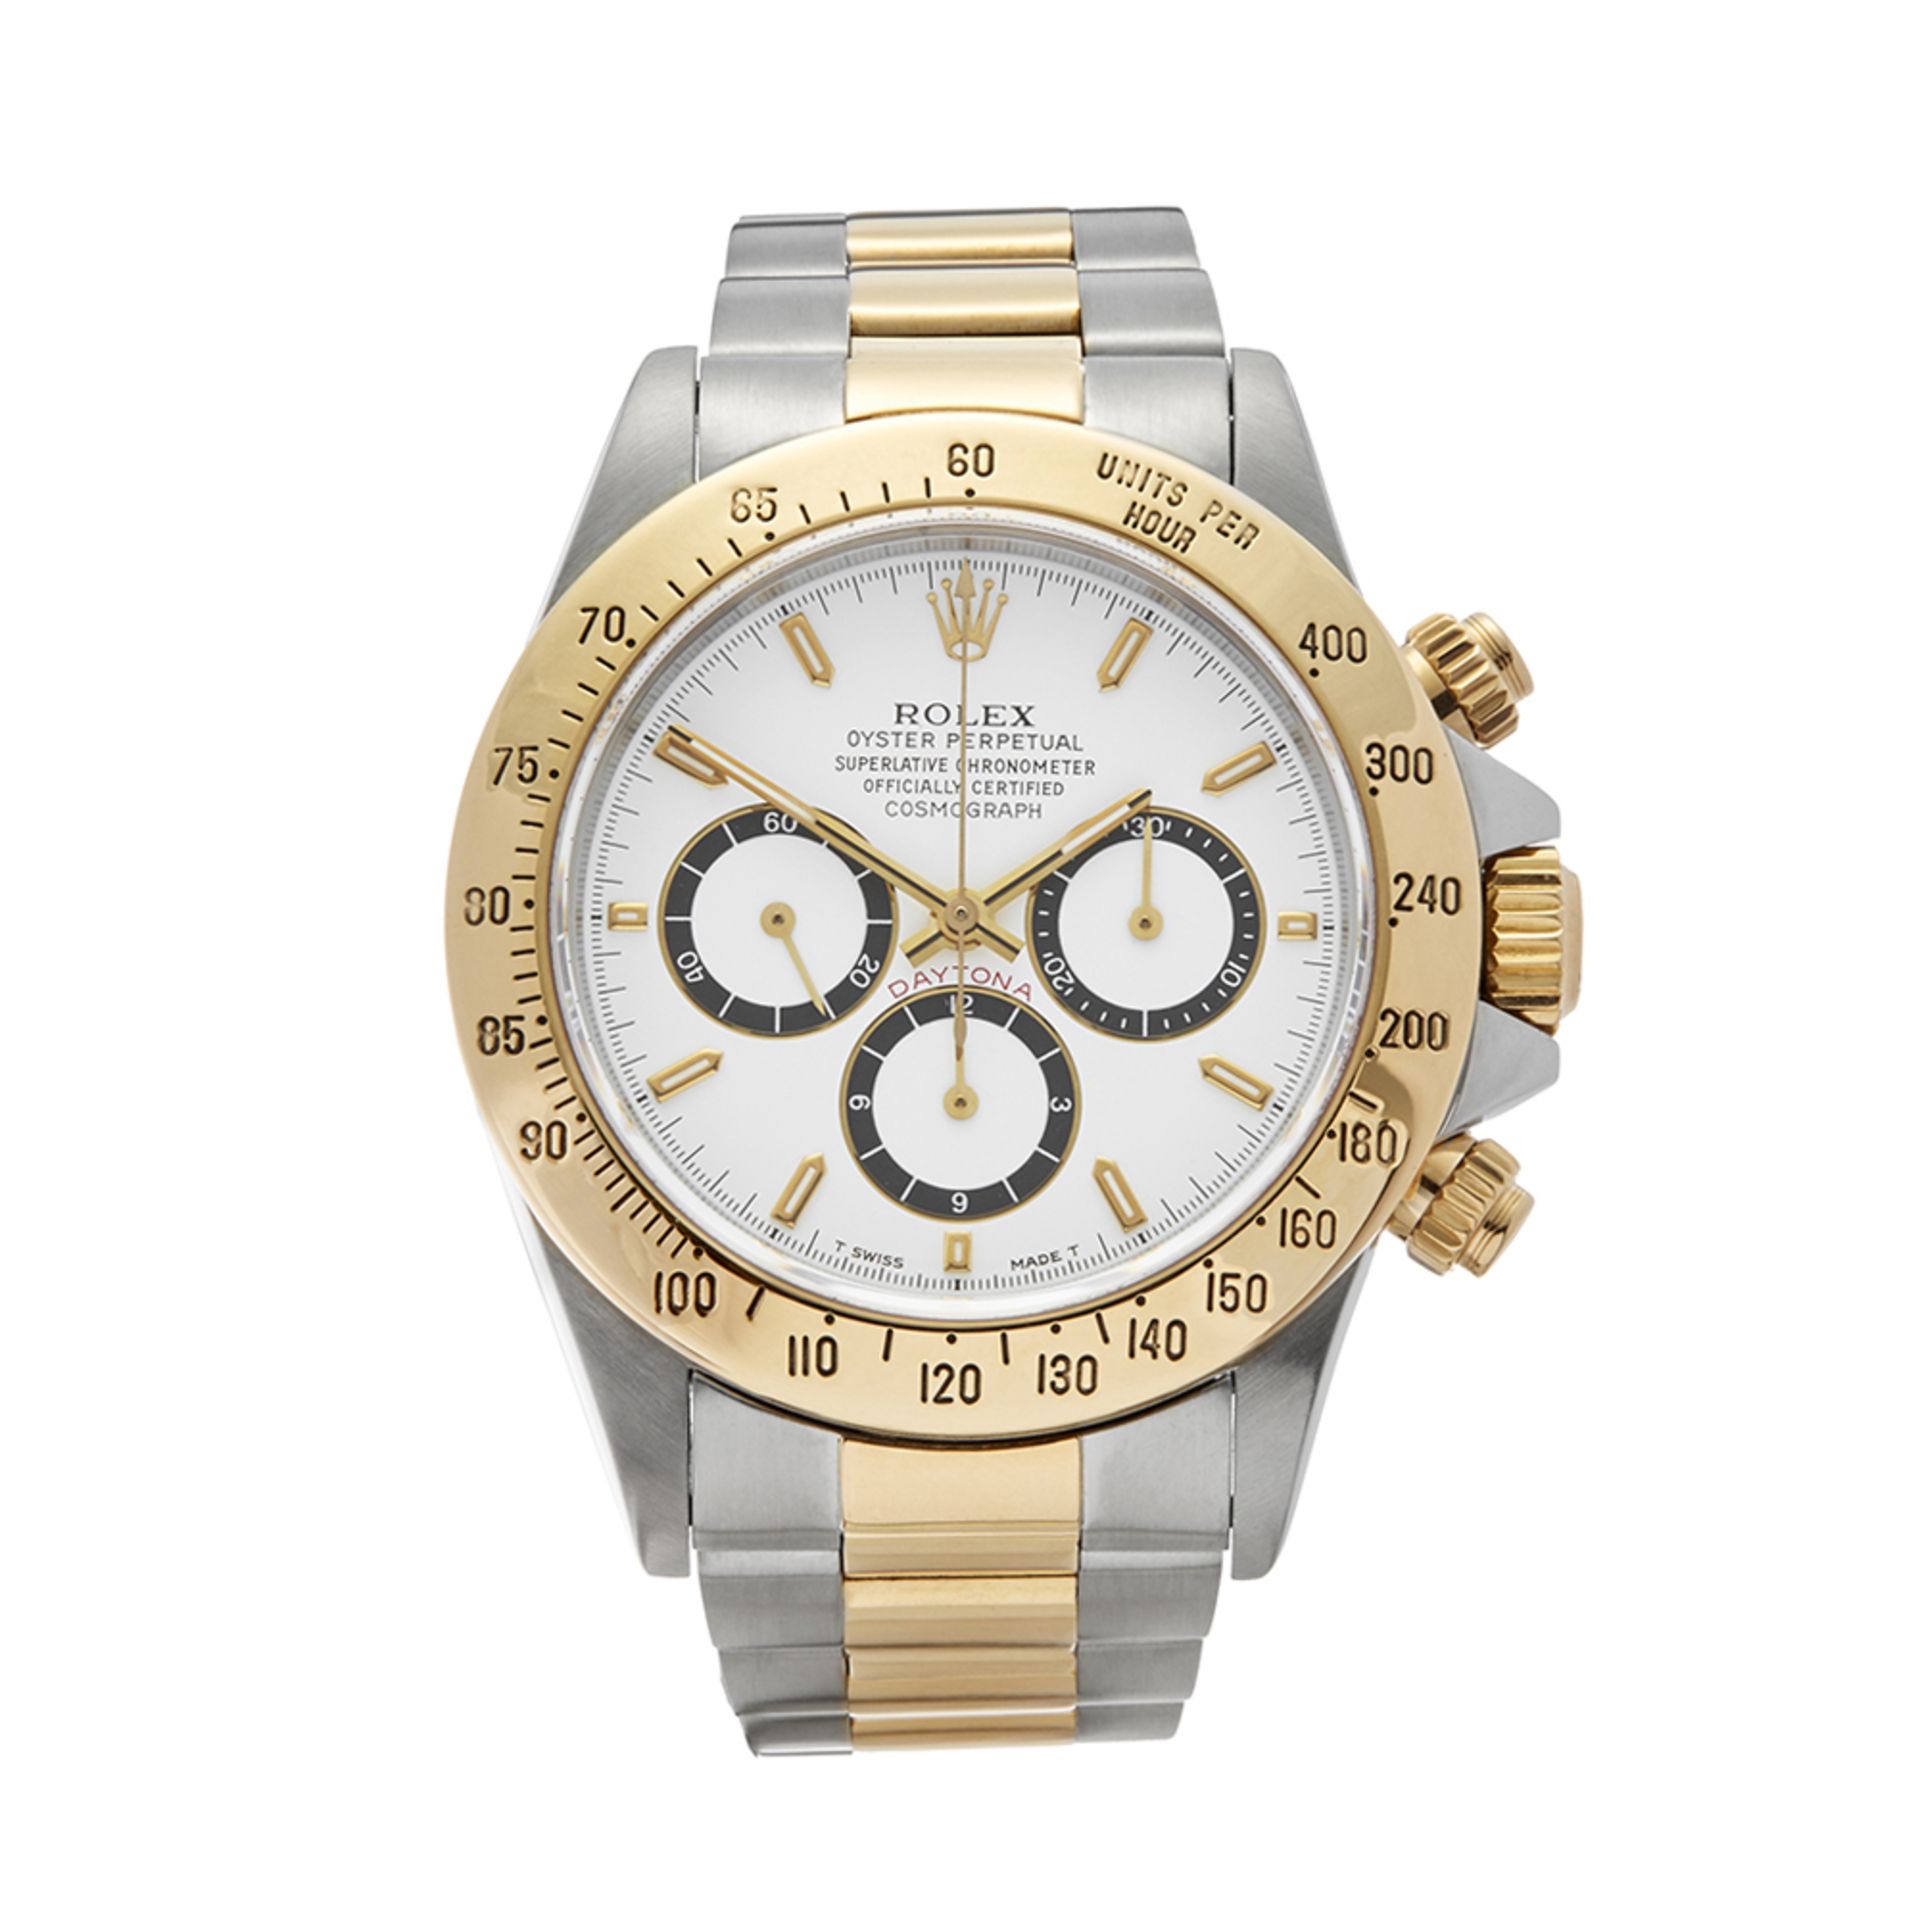 Rolex Daytona Chronograph Inverted 6 40mm Stainless Steel & 18k Yellow Gold - 16523 - Image 2 of 7